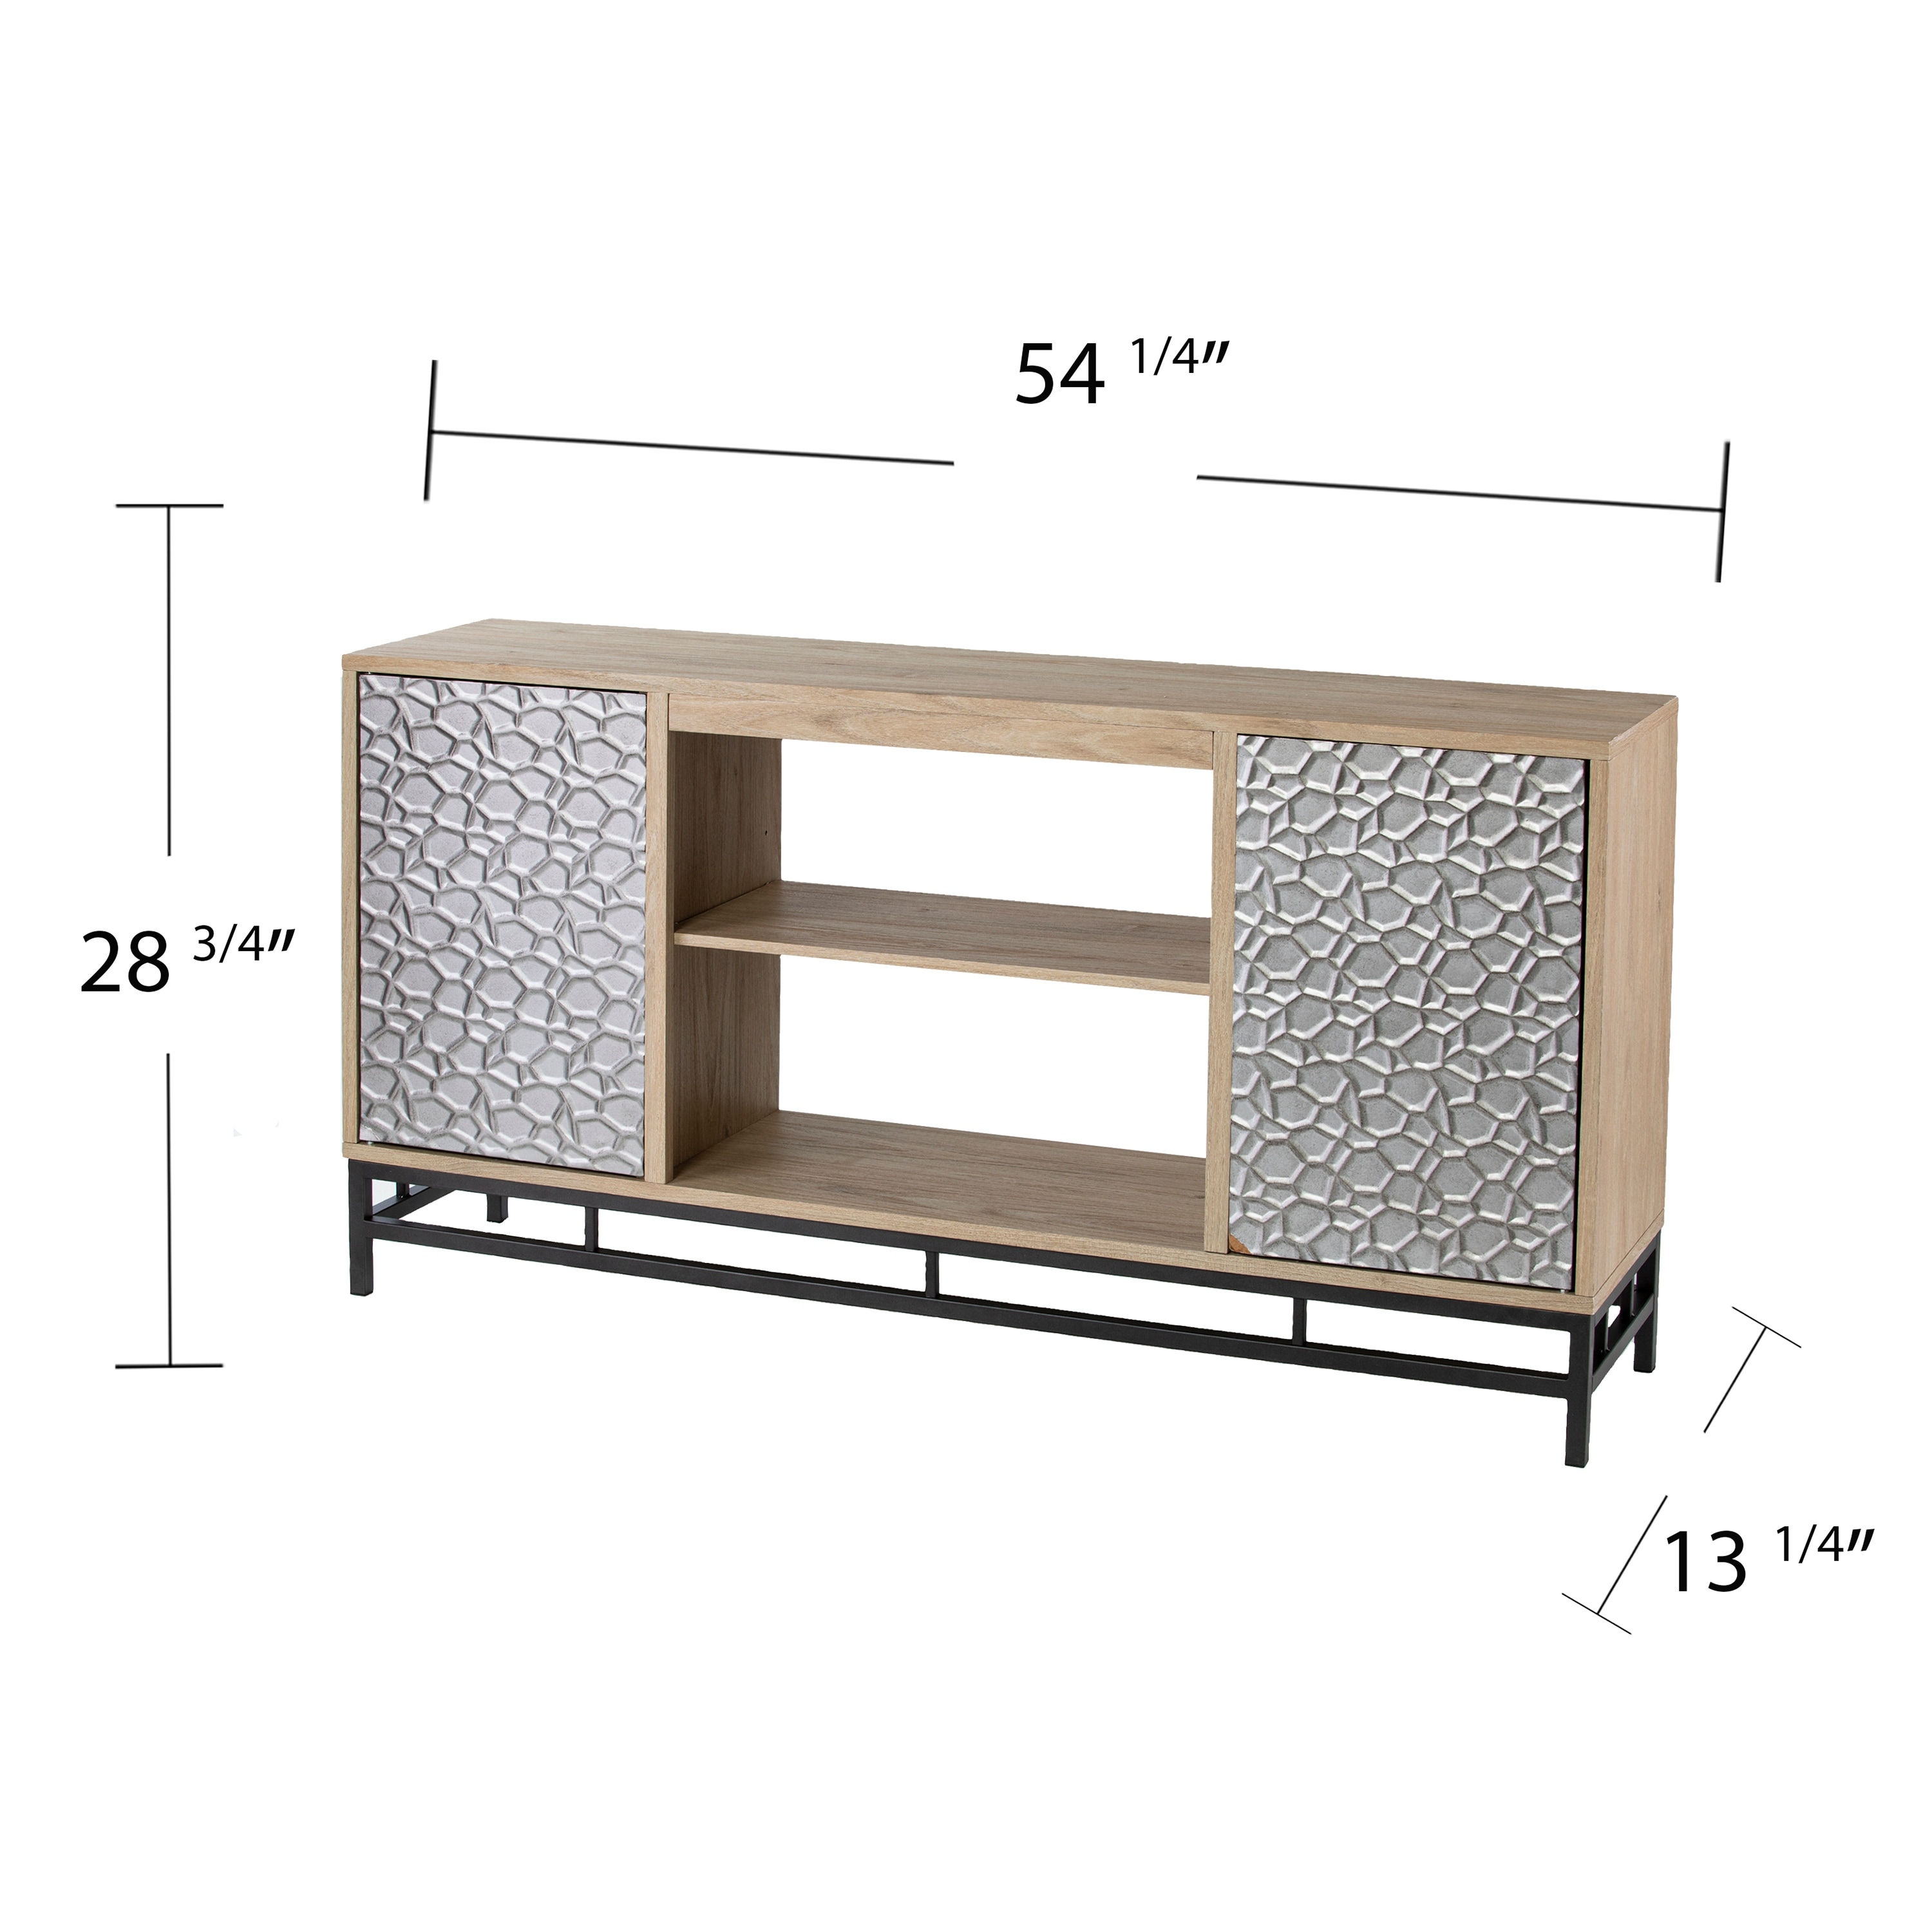 SEI Furniture Hollesborne Media TV Stand w/ Storage for TV's up to 50"